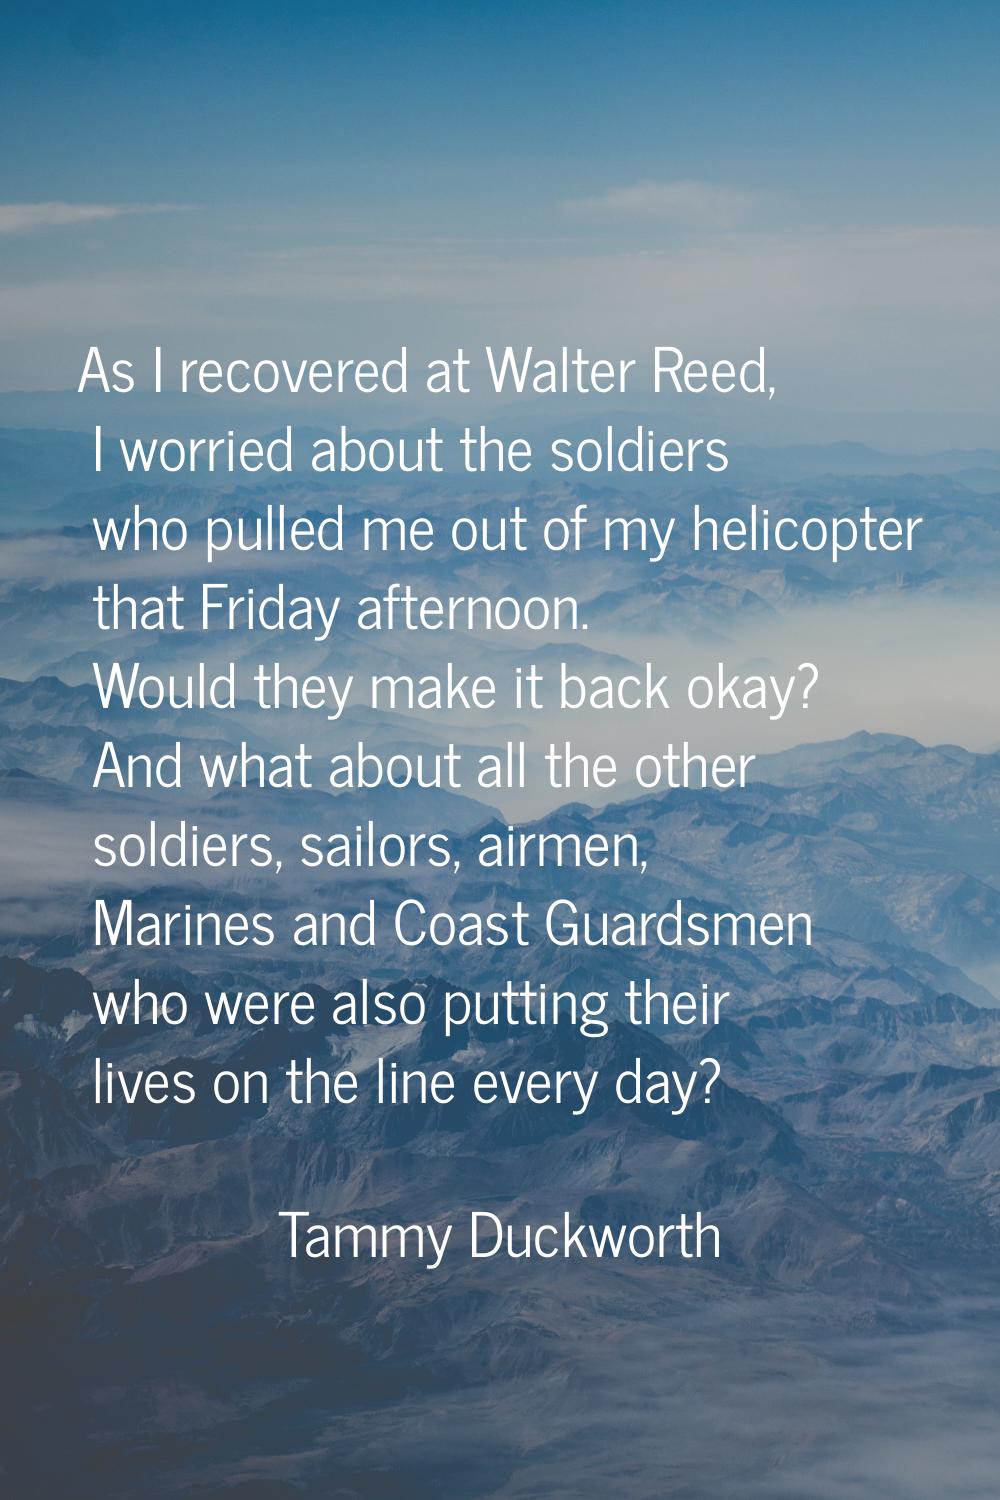 As I recovered at Walter Reed, I worried about the soldiers who pulled me out of my helicopter that